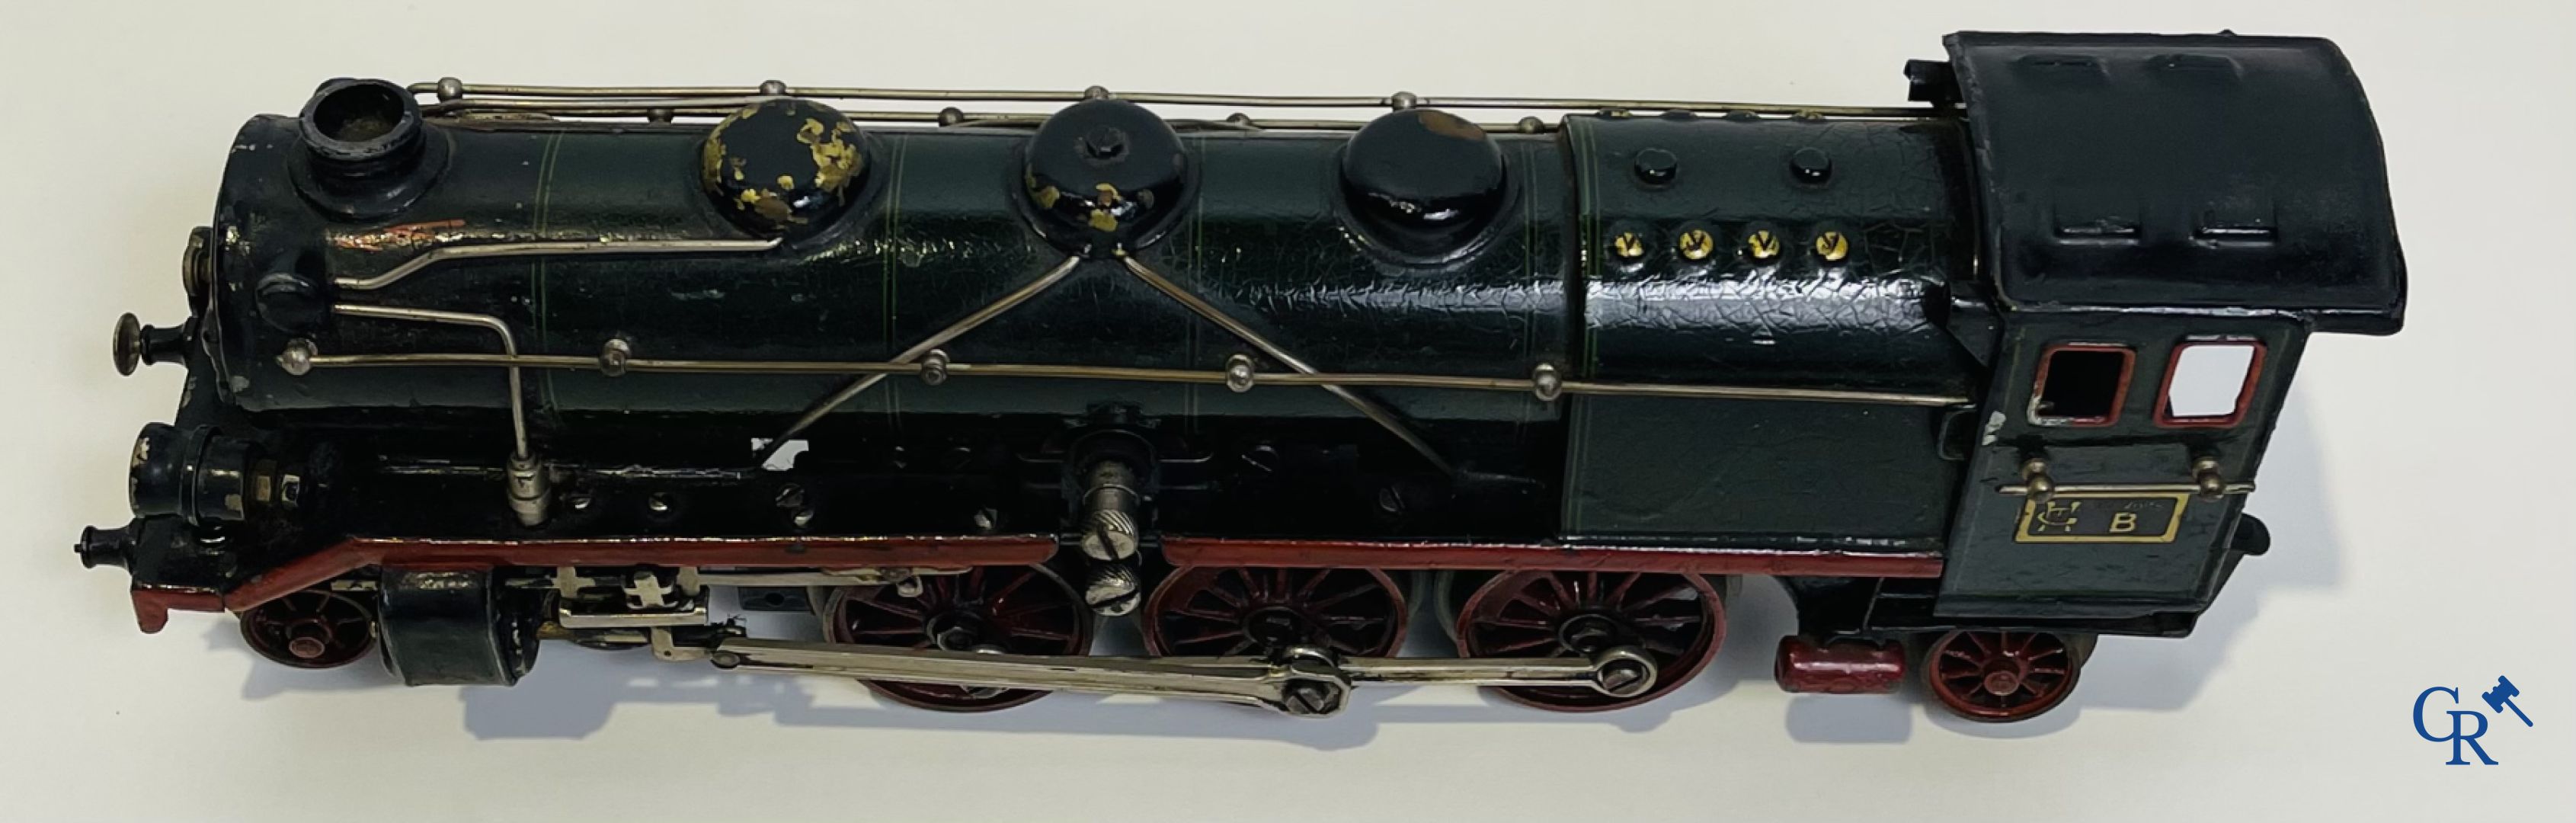 Old toys: Märklin, Locomotive with towing tender and dining car.
About 1930. - Image 4 of 32